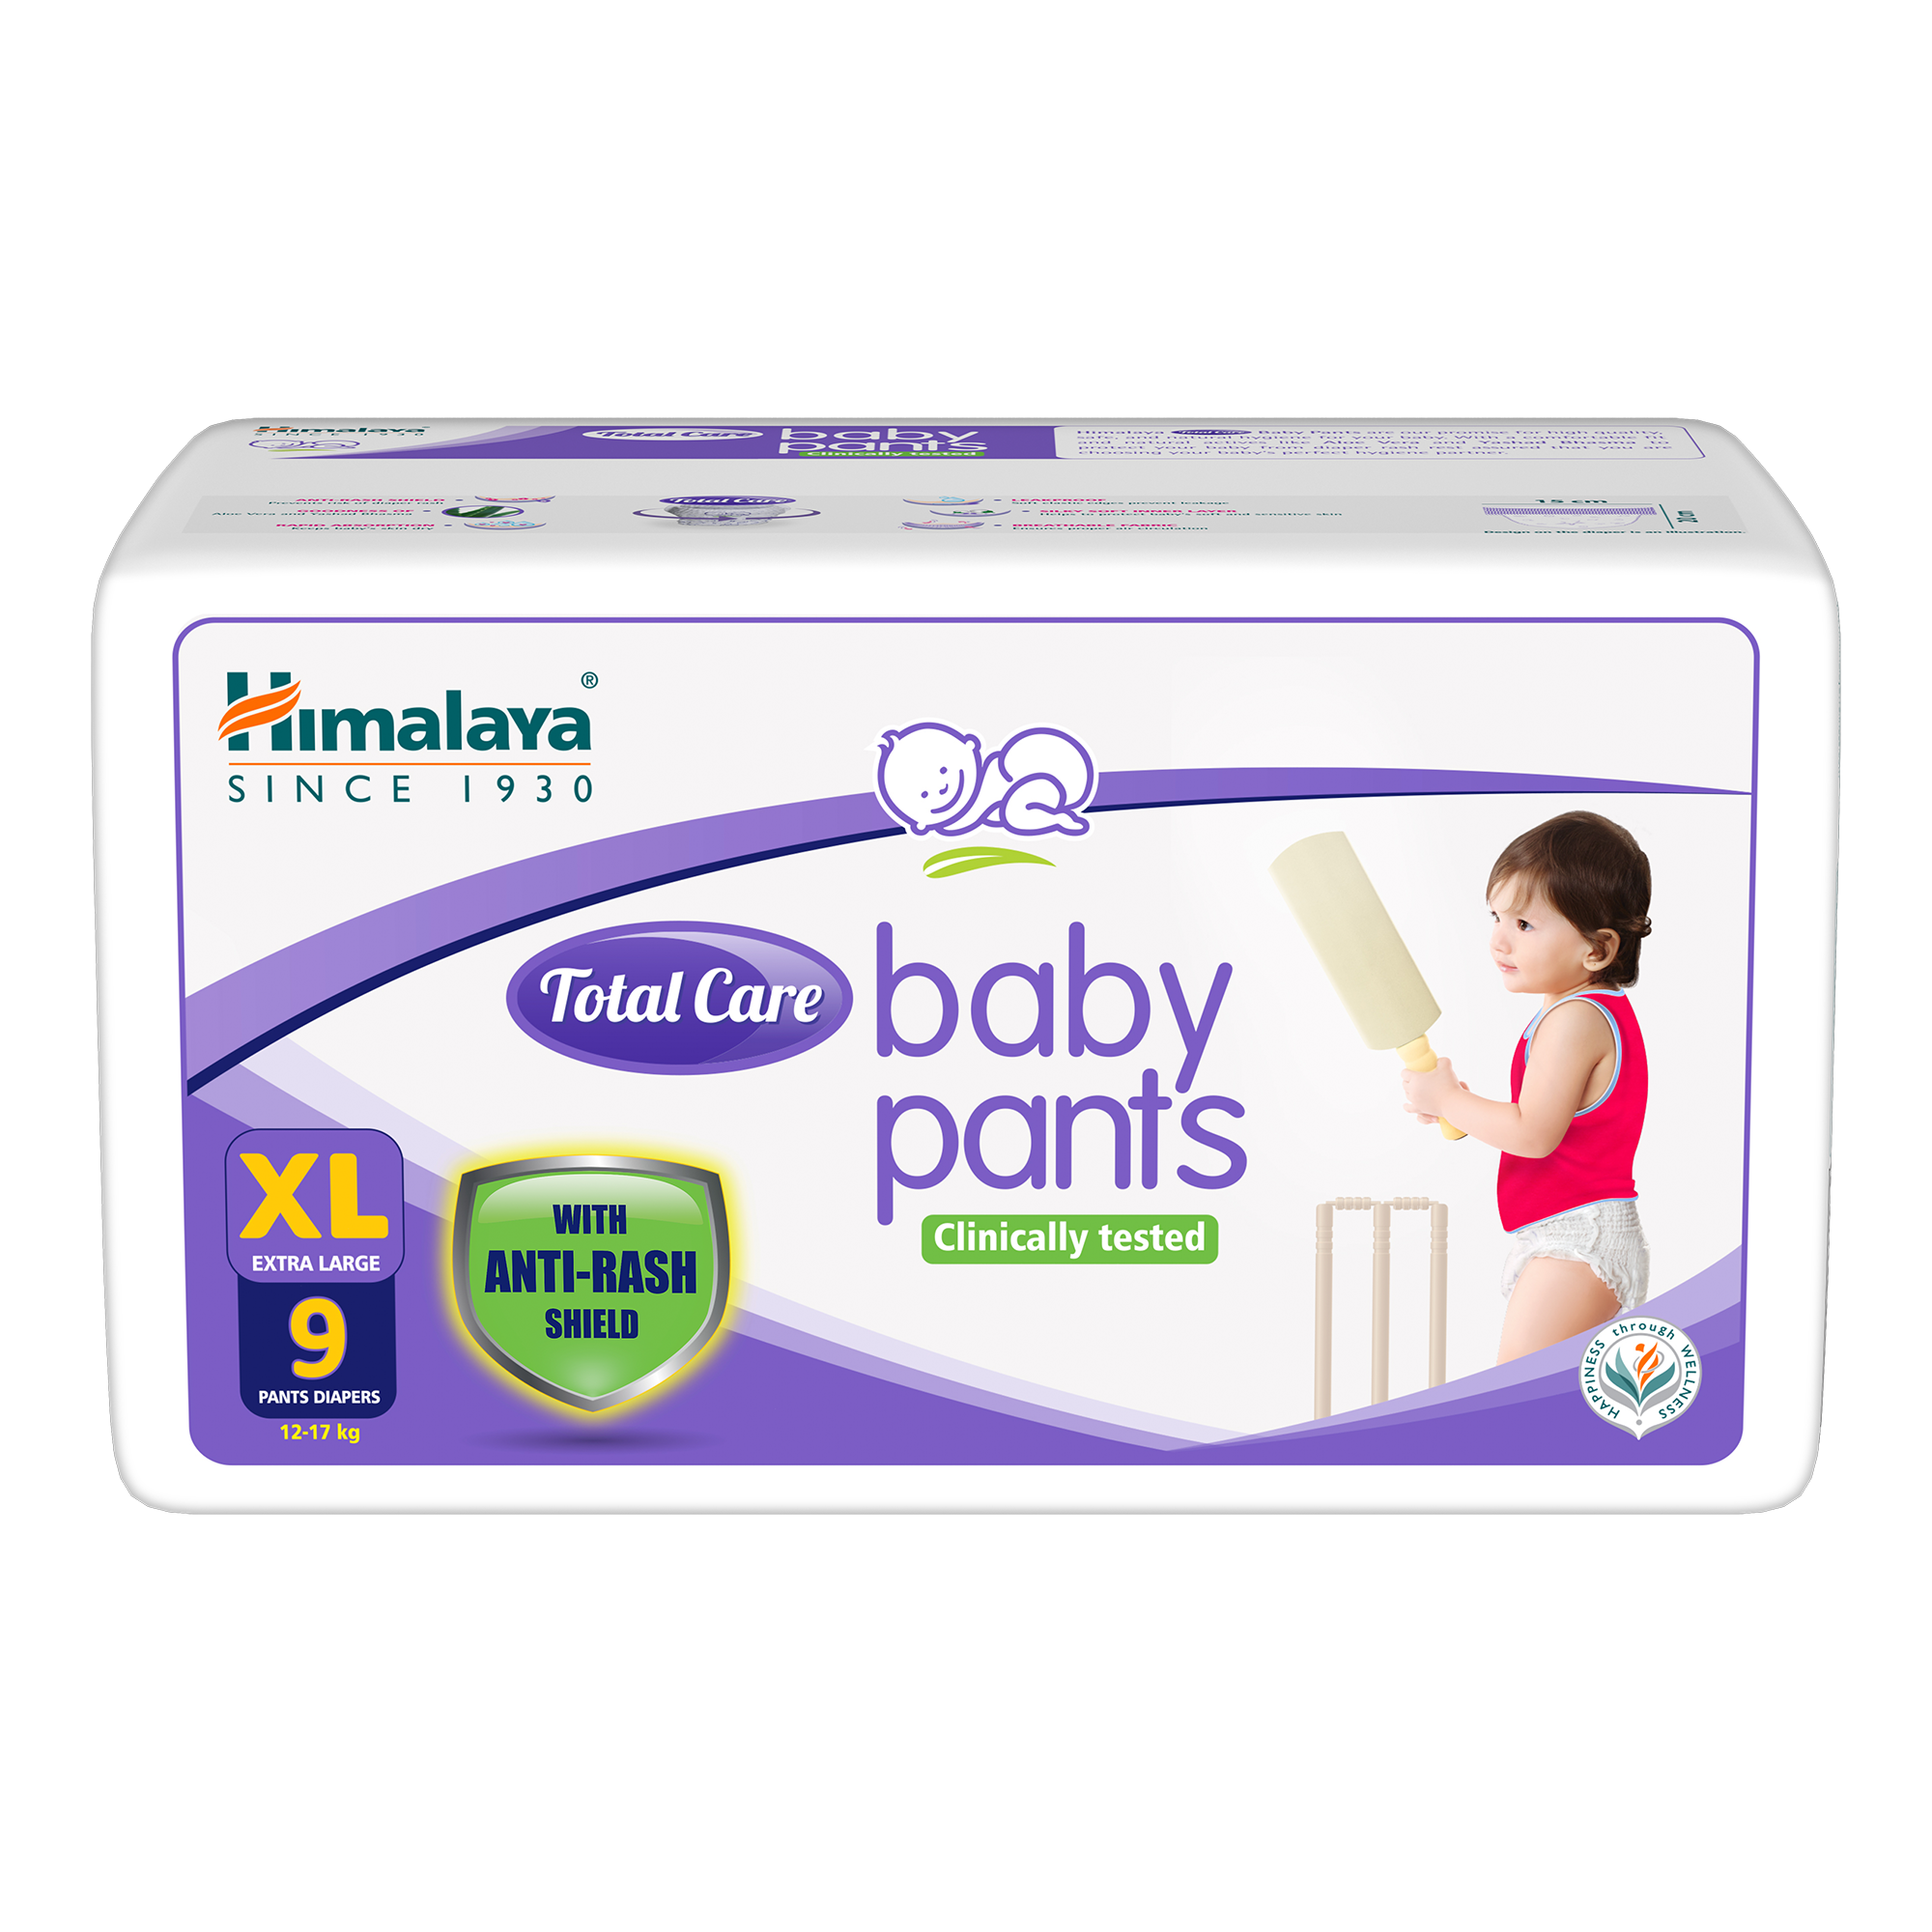 Himalaya Total Care Baby Pants XL 28 Uses Price Dosage Side Effects  Substitute Buy Online